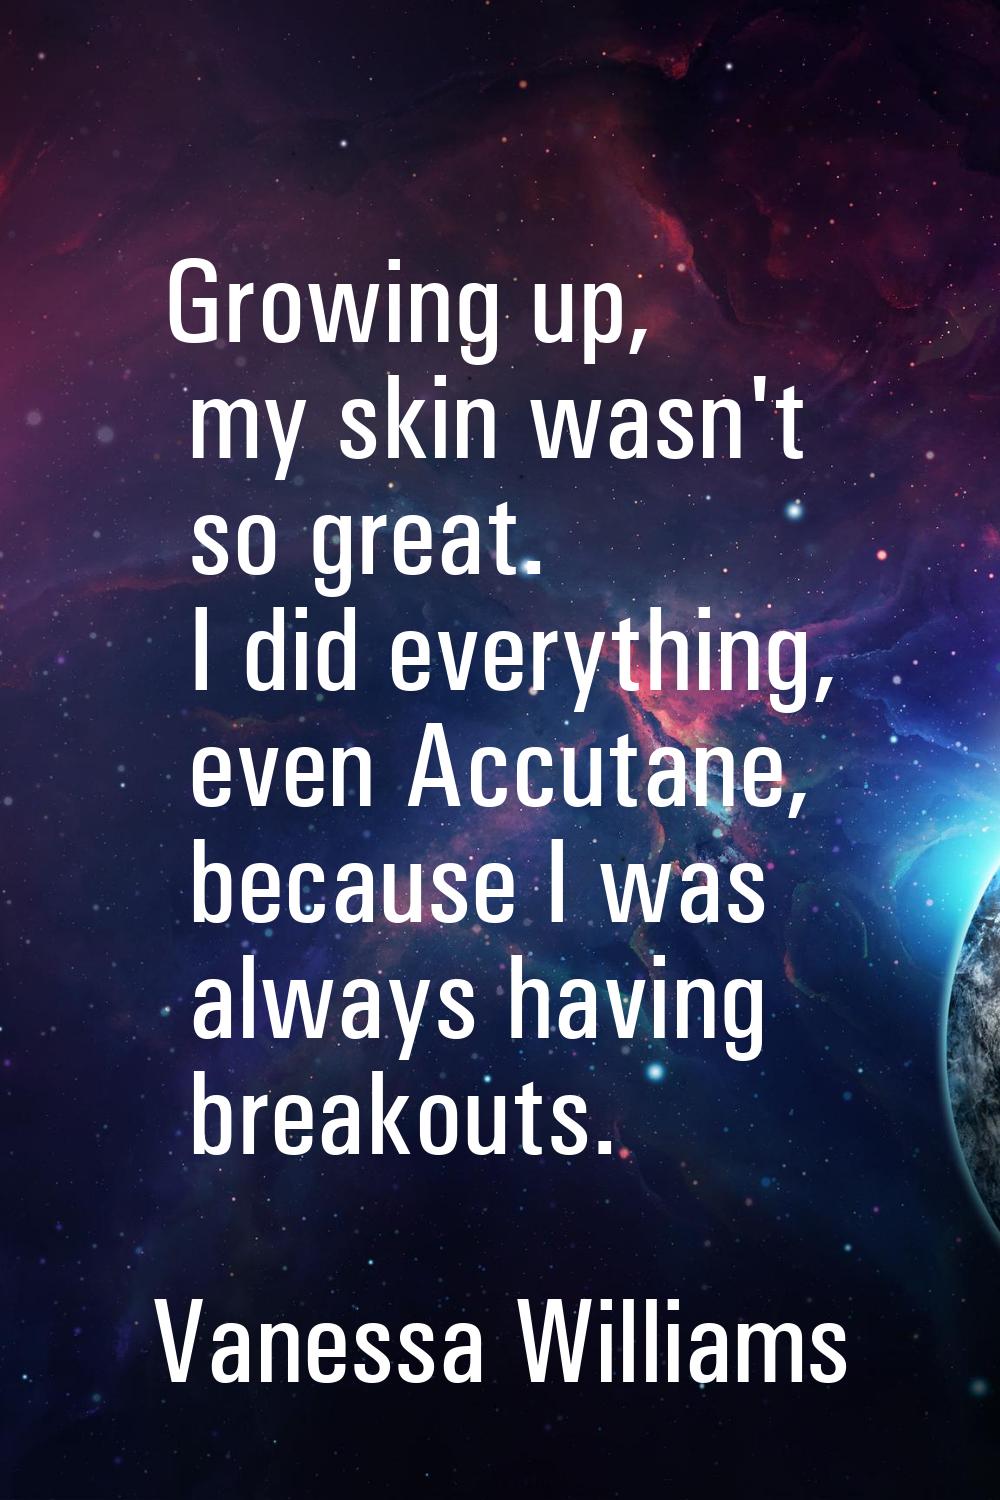 Growing up, my skin wasn't so great. I did everything, even Accutane, because I was always having b